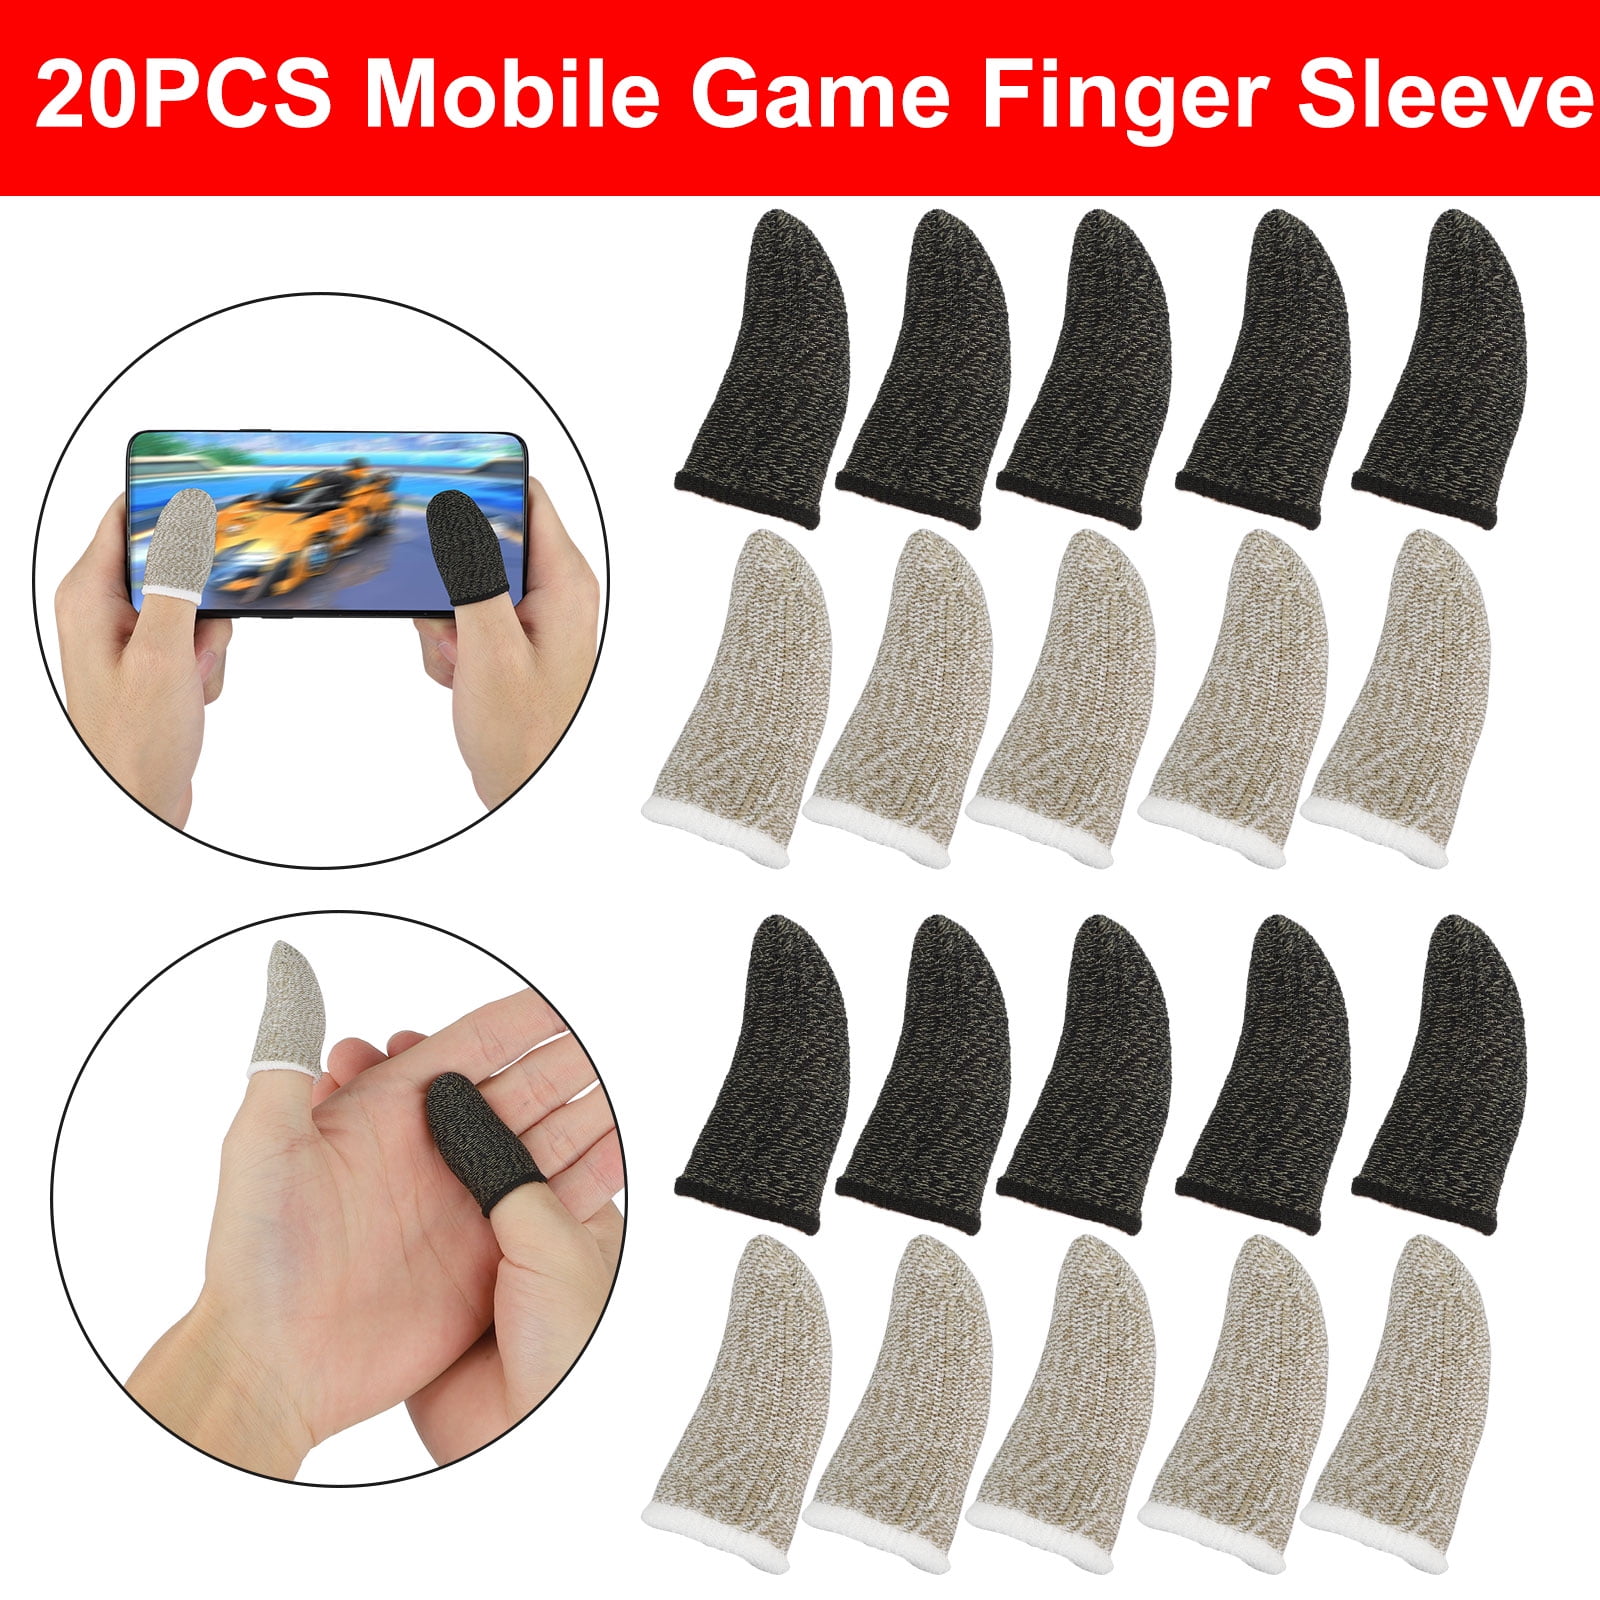 Whewer Mobile Game Controller Finger Sleeve Sets 4 Pcs Finger Sleeves for Gaming Anti-Sweat Full Touch Screen Sensitive Shoot Aim Joysticks Finger Set for PUBG/Knives Out/Rules of Survival